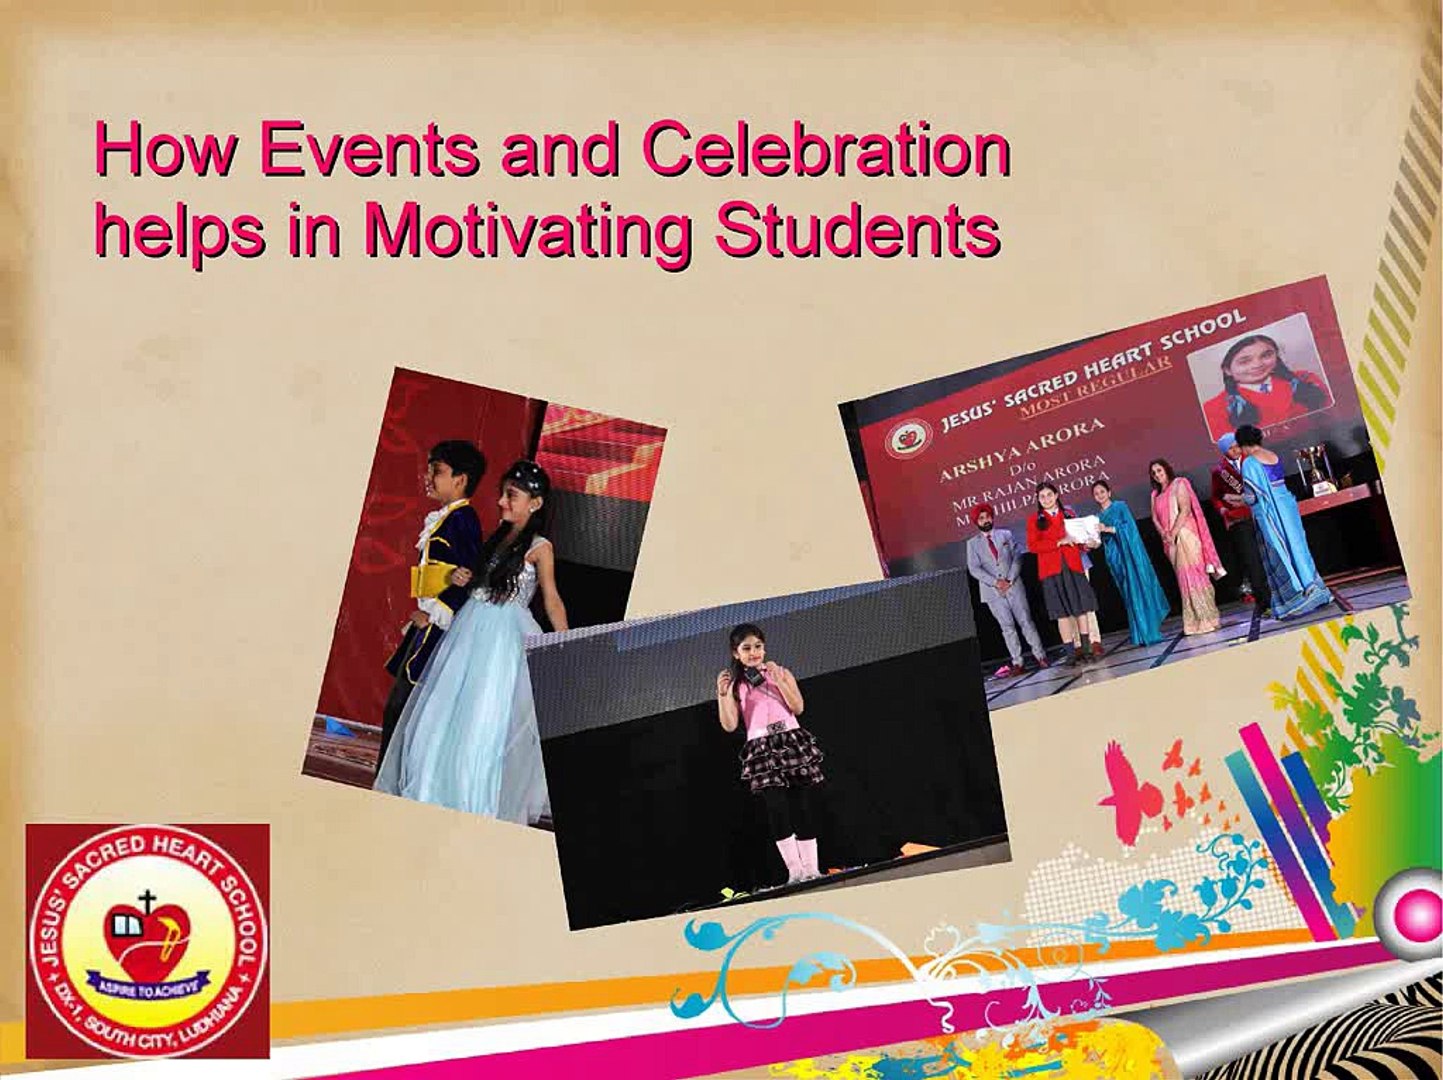 How Events and Celebration help students with Motivation?